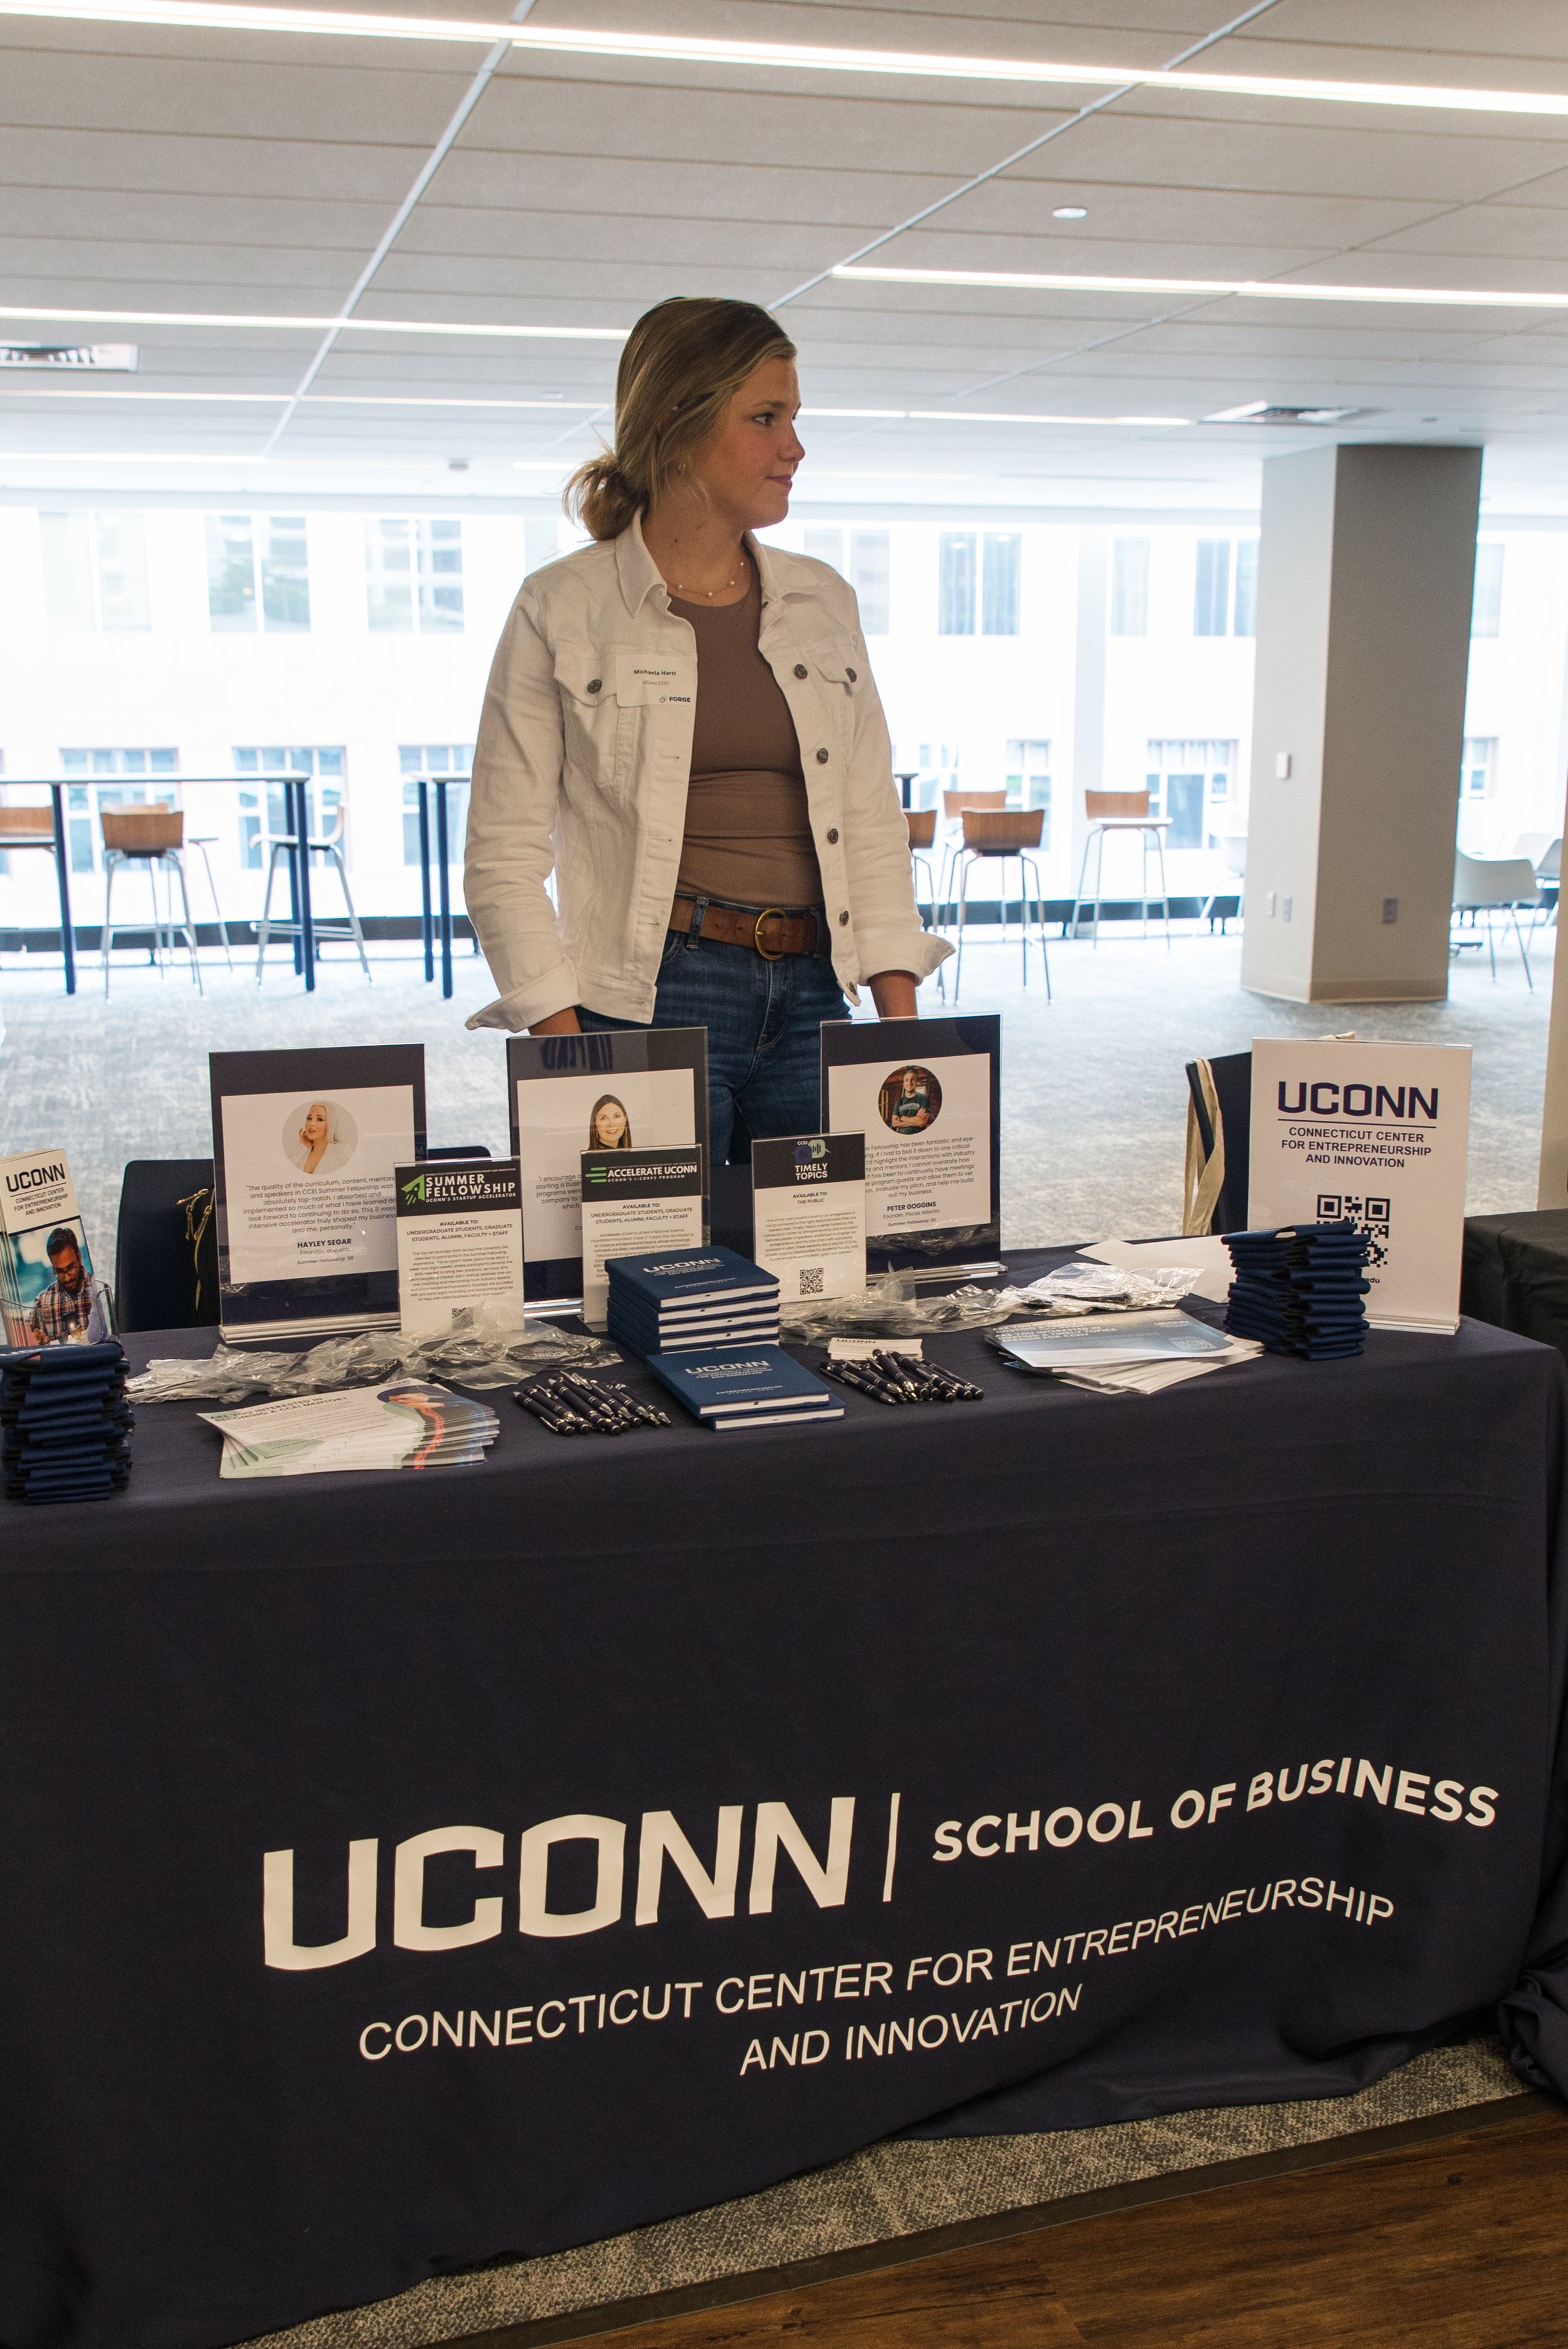  The UCONN School of Business booth  